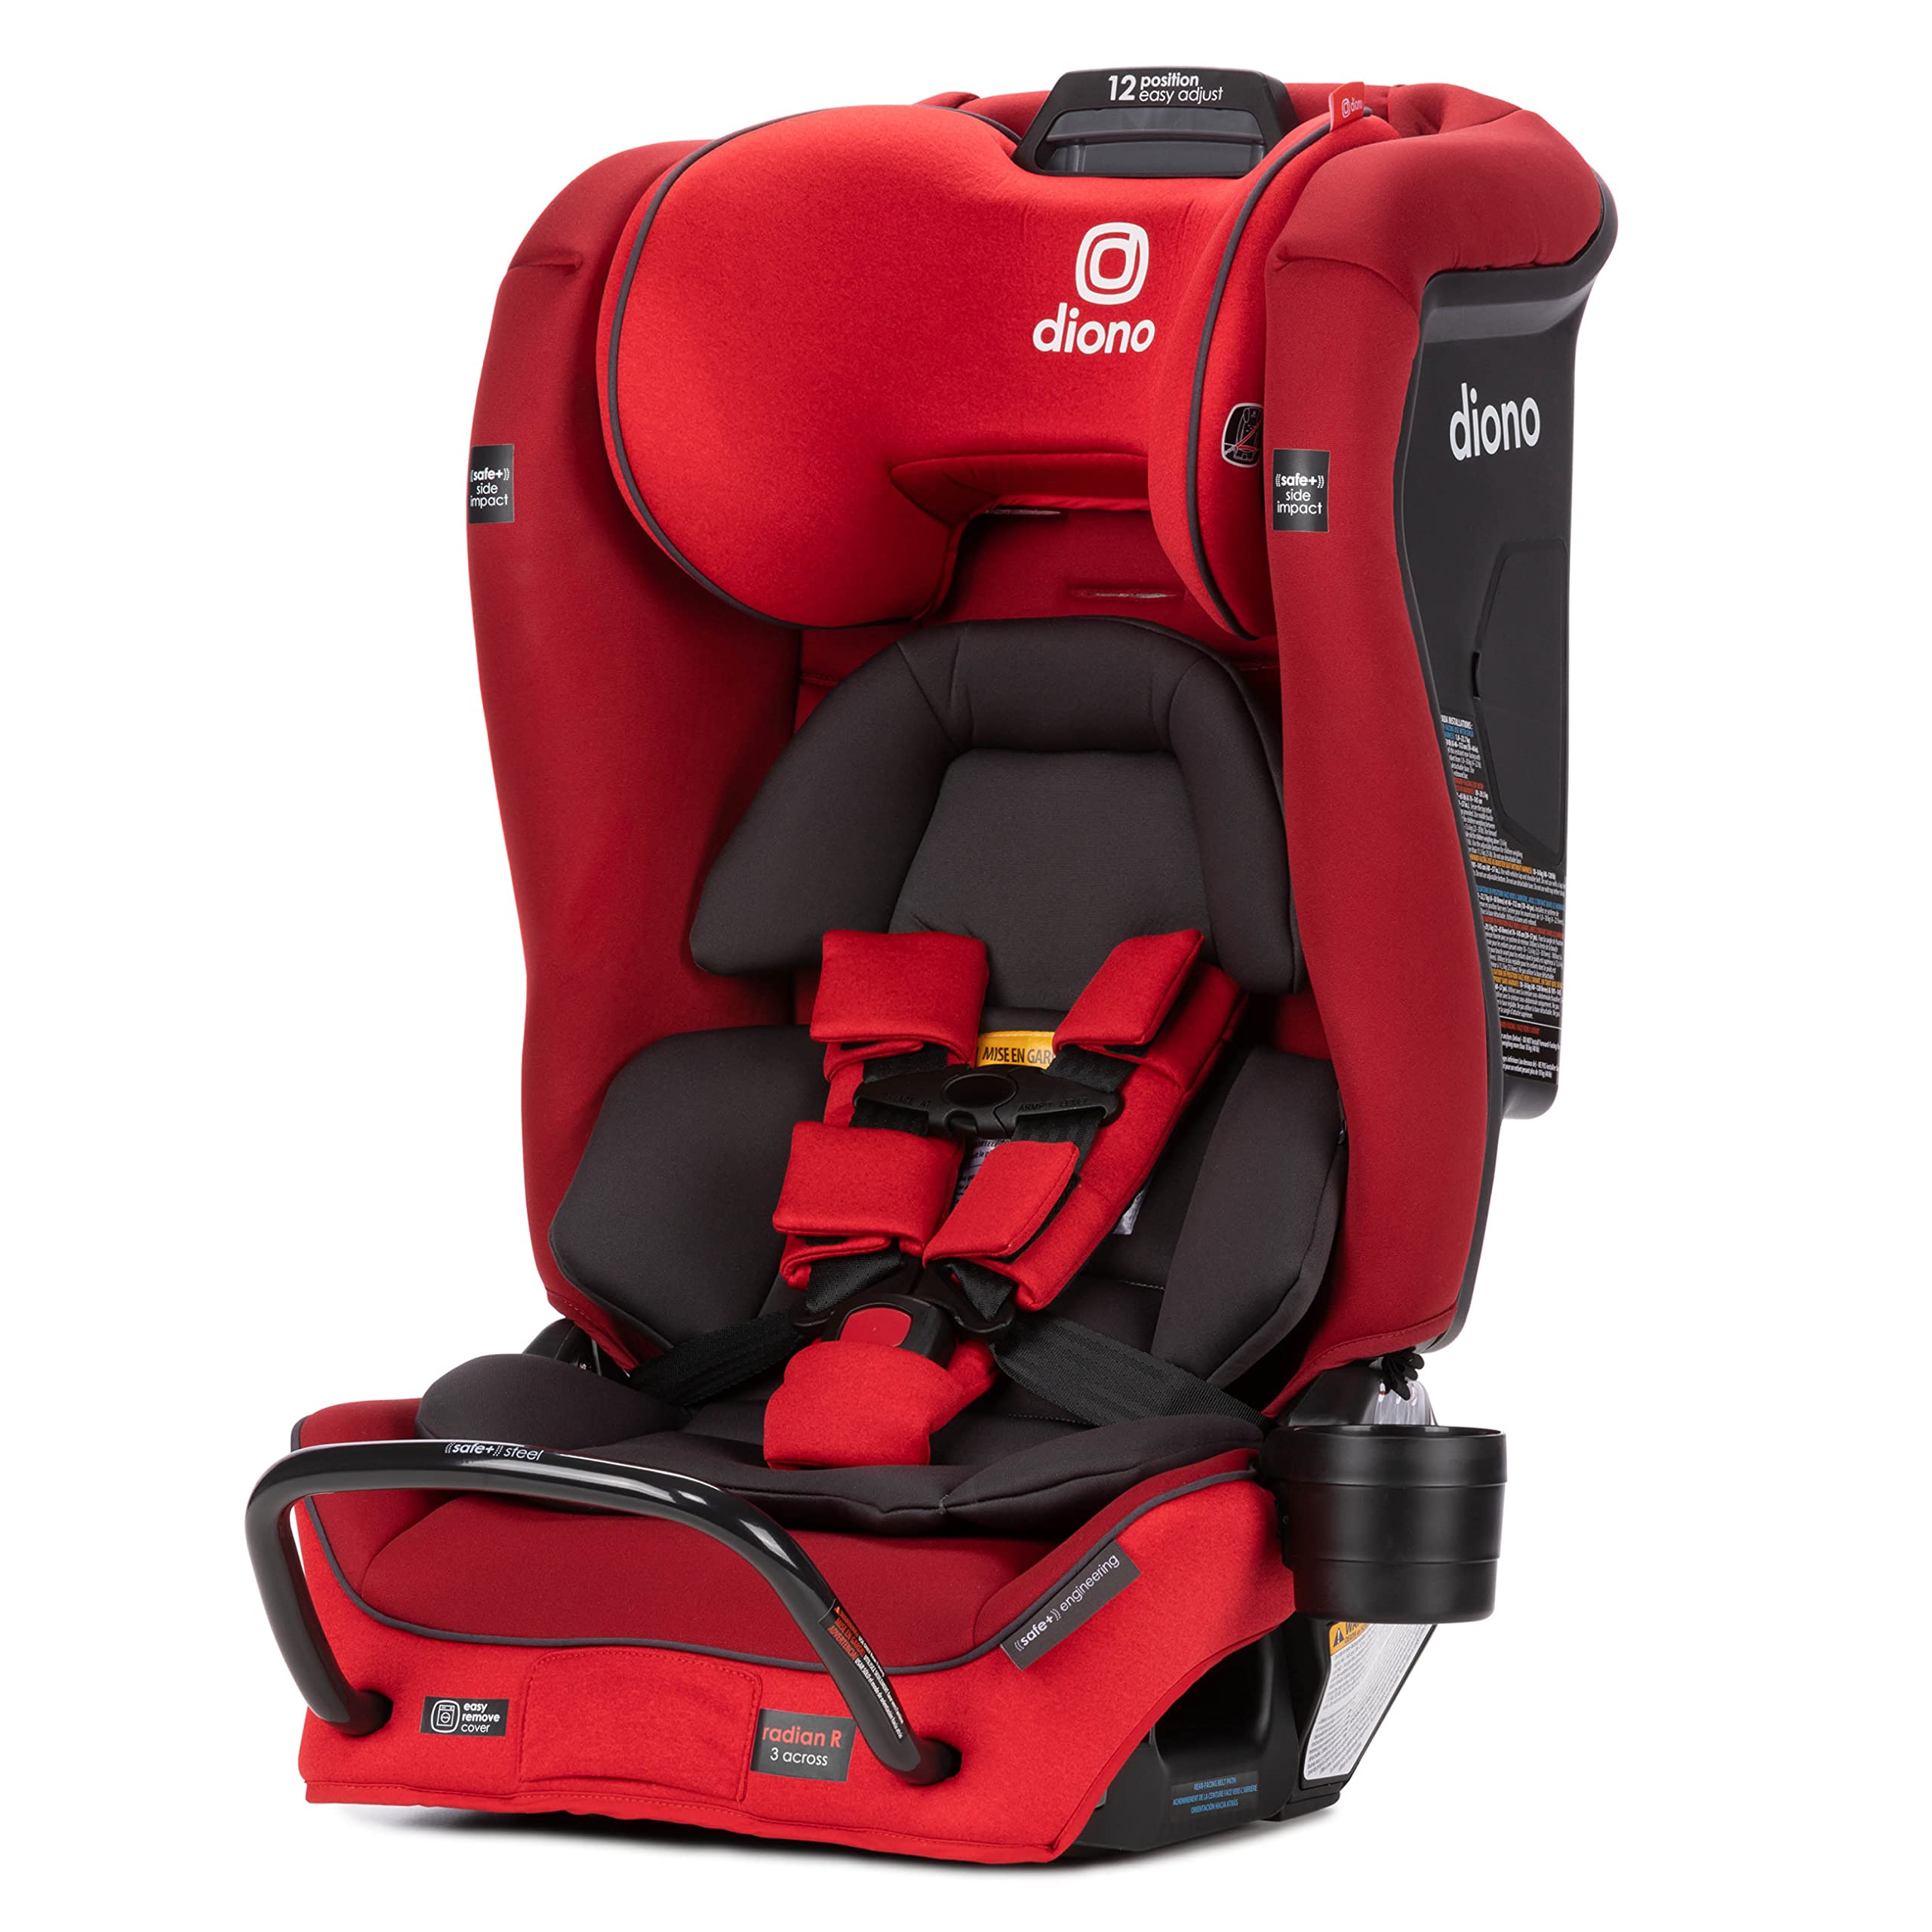 Diono Radian 3RXT SafePlus, 4-in-1 Convertible Car Seat, Rear and Forward Facing, SafePlus Engineering, 3 Stage -Infant Protection, 10 Years 1 Car Seat, Slim Fit 3 Across, Red Cherry